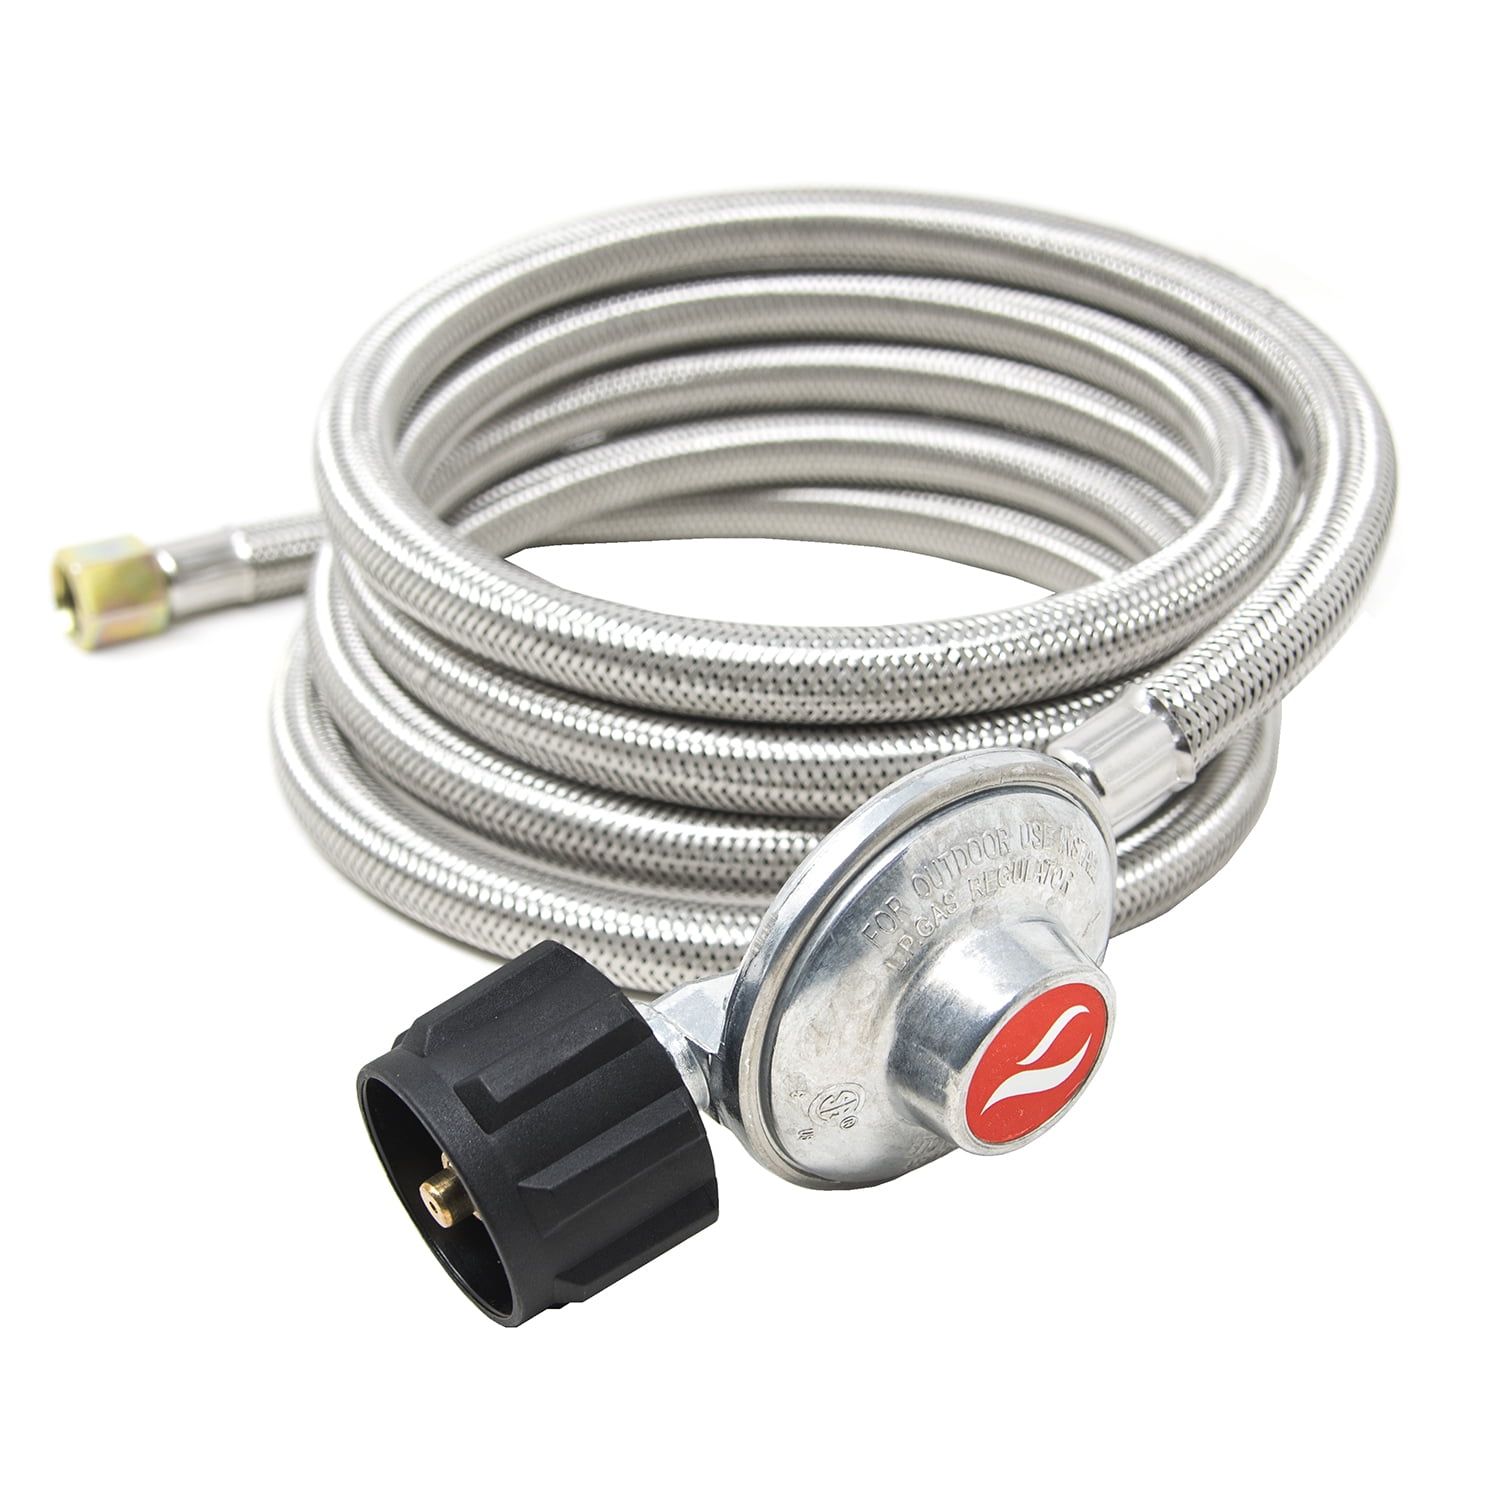 GasOne Propane Regulator 8 Feet Stainless Steel Hose with for Most LP Gas Grill, Heater and Fire Propane Regulator With Hose For Fire Pit